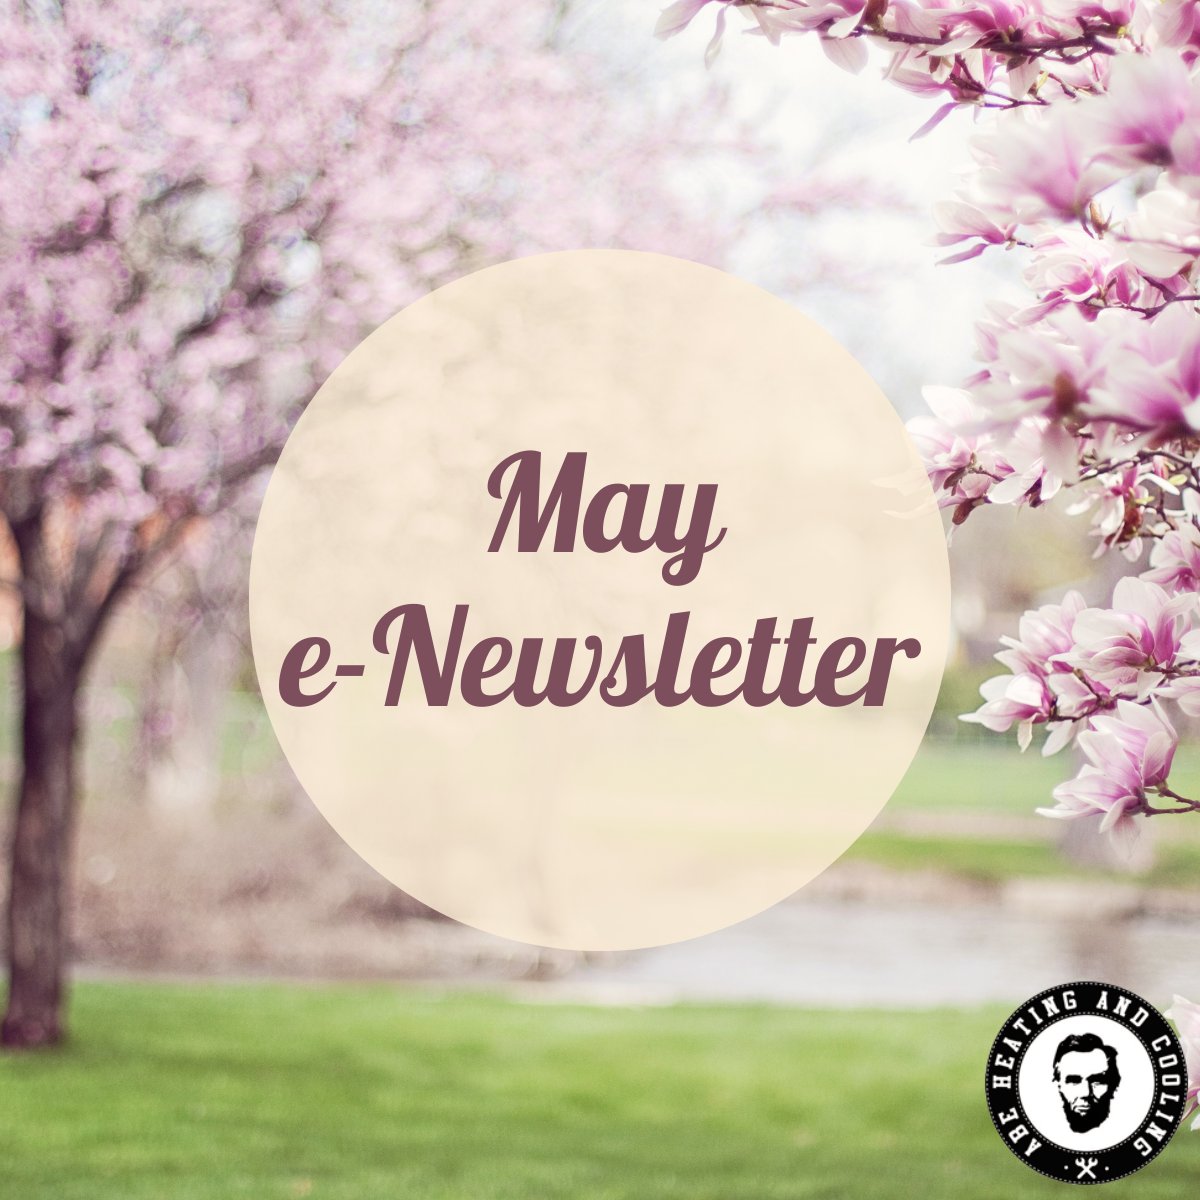 Check out Our May E-newsletter

It has Useful Articles, Money & Energy Saving Tips, Special Info, and More!

mailchi.mp/2eeb7b9e425c/m…

#HVACcontractors #HVACExperts #HVACColorado #HVACService #HVACTech #HVACDenver #ABEHeatingandCooling #Geothermal